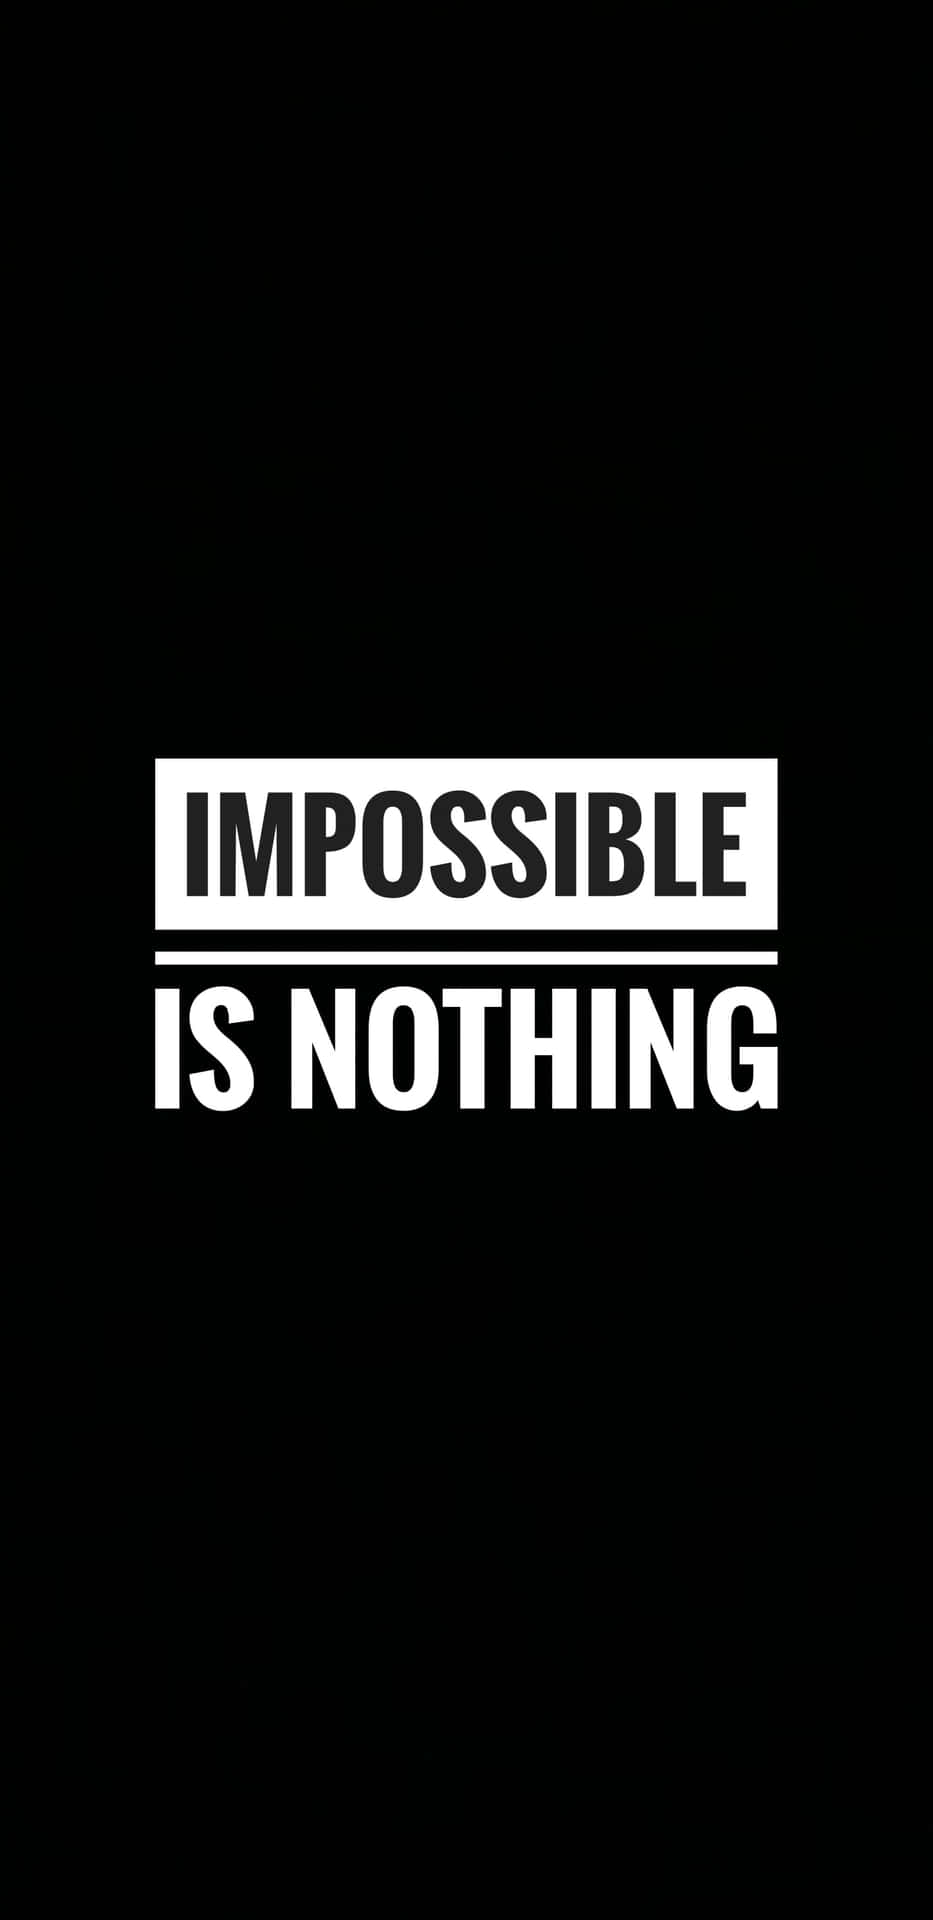 Impossible Is Nothing - T-shirt Wallpaper